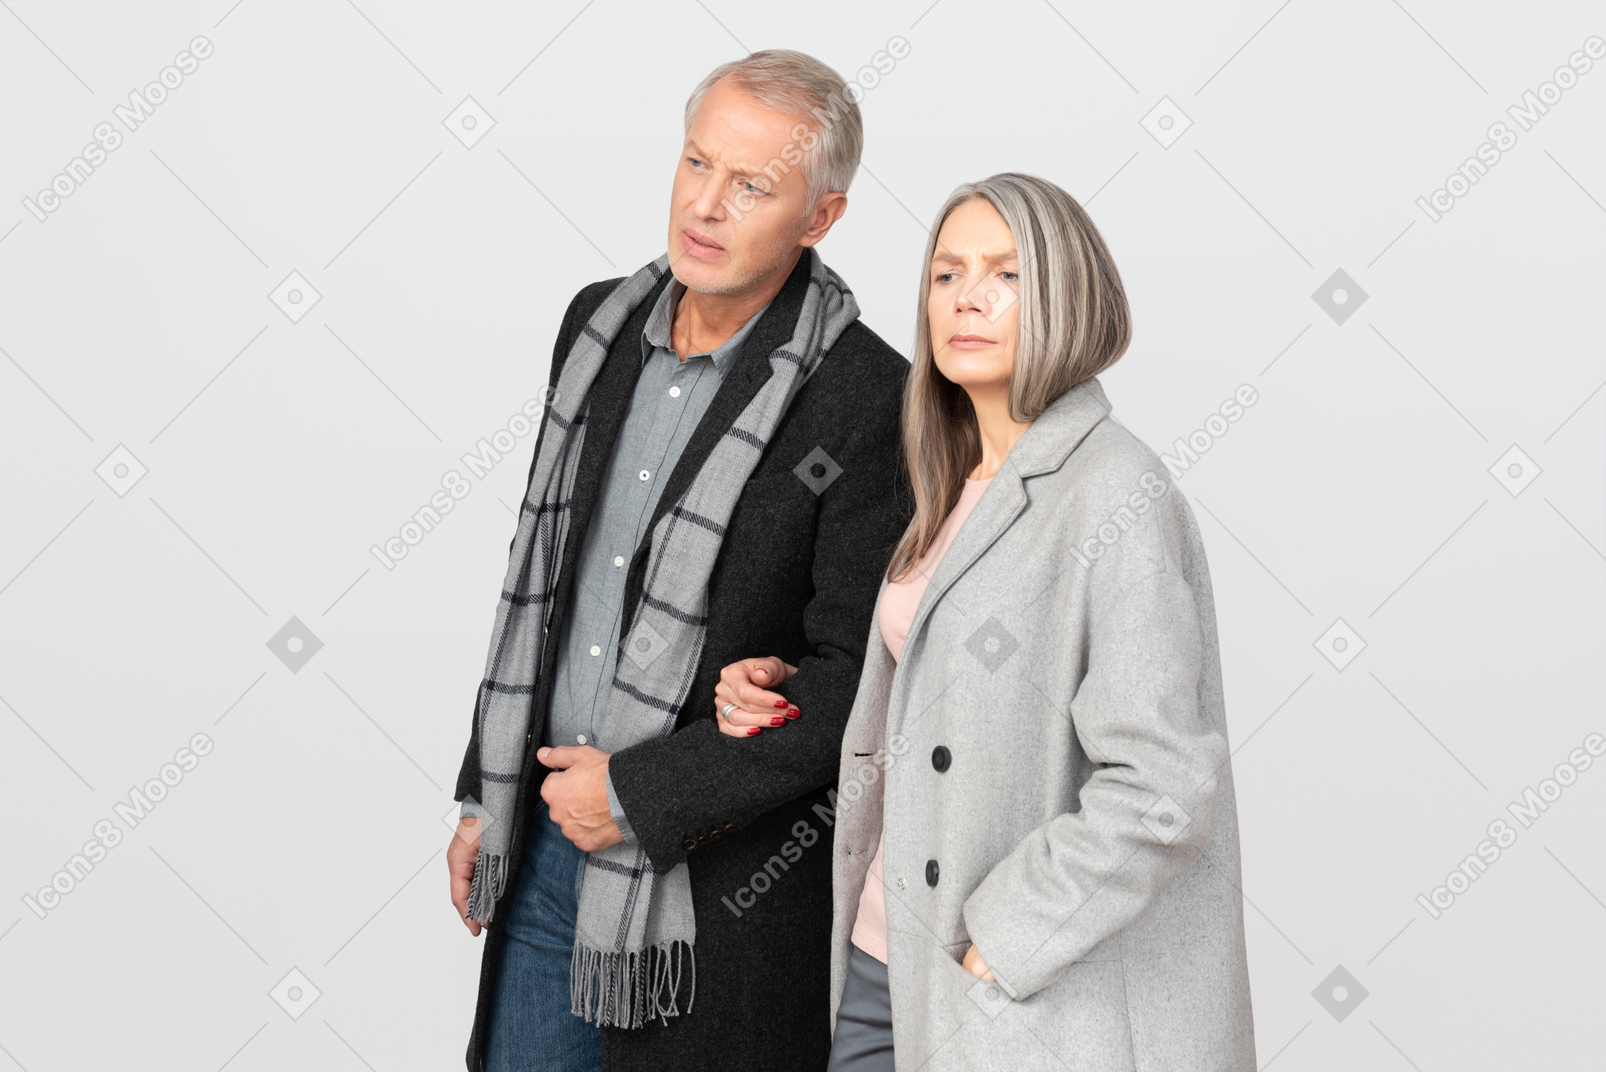 Mature couple seeming troubled